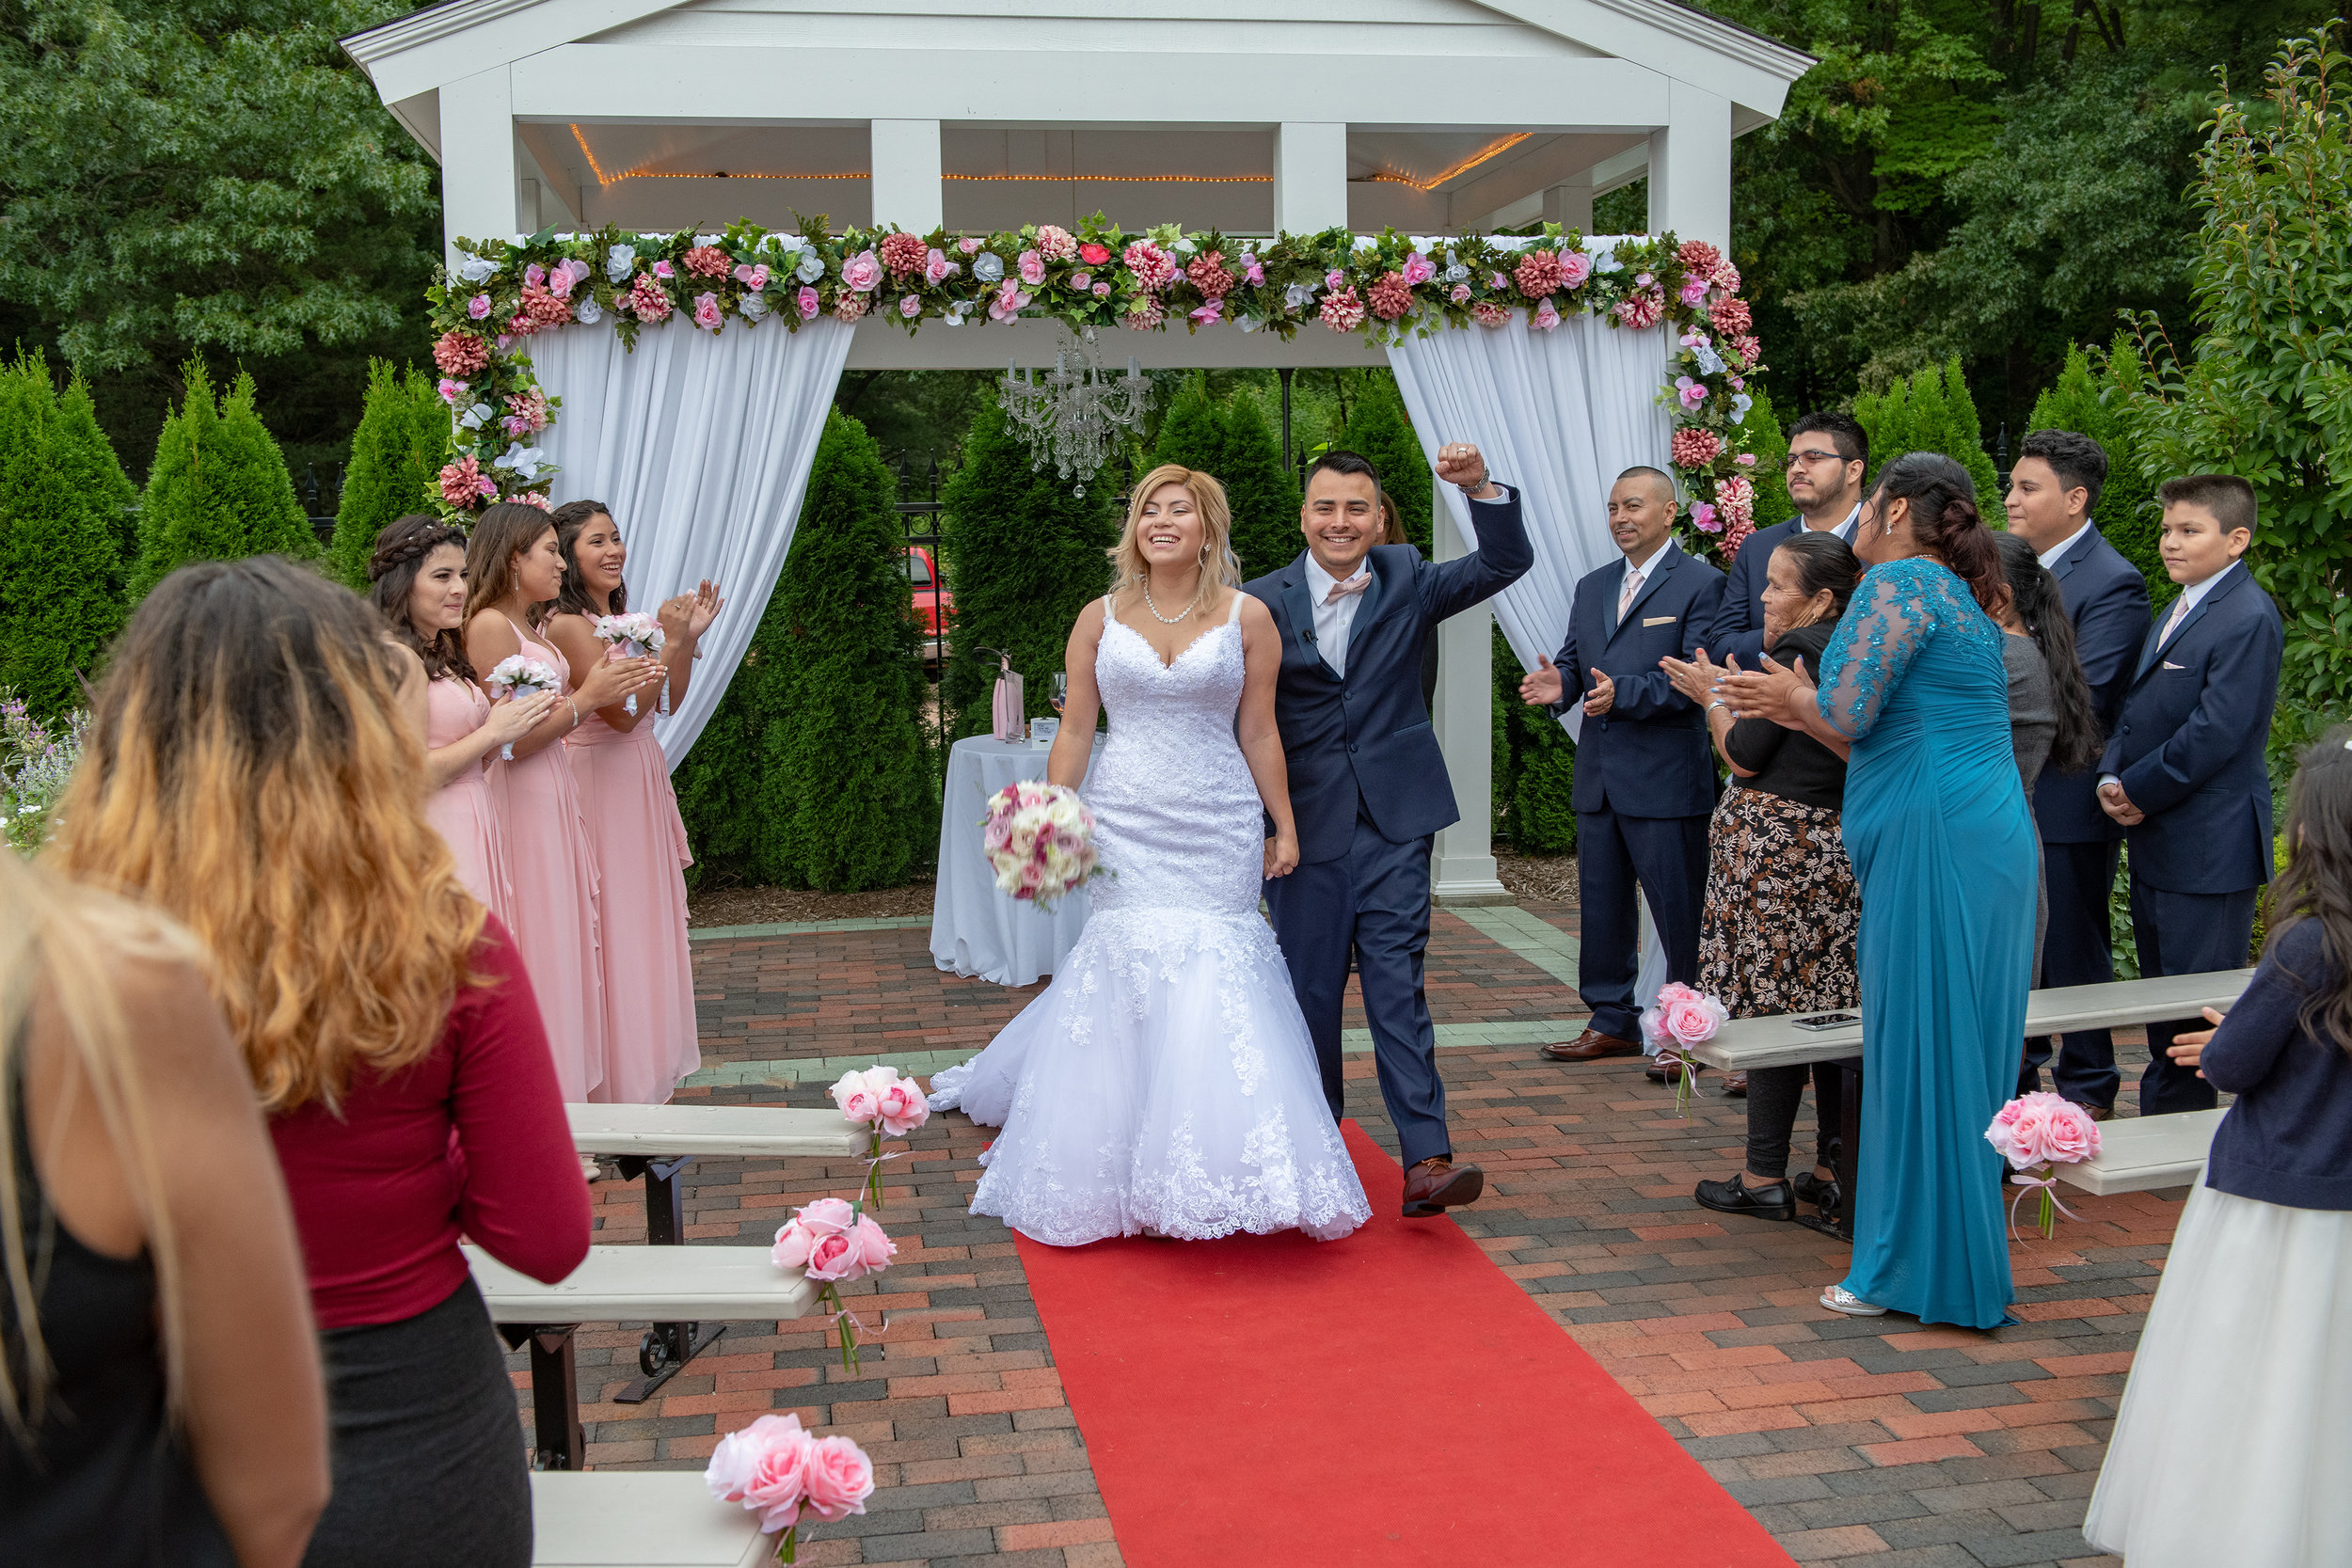 THE WEDDING CEREMONY AT WICKHAM PARK IS OVER THE BRIDE AND GROOM EXIT THE CEREMONY.jpg